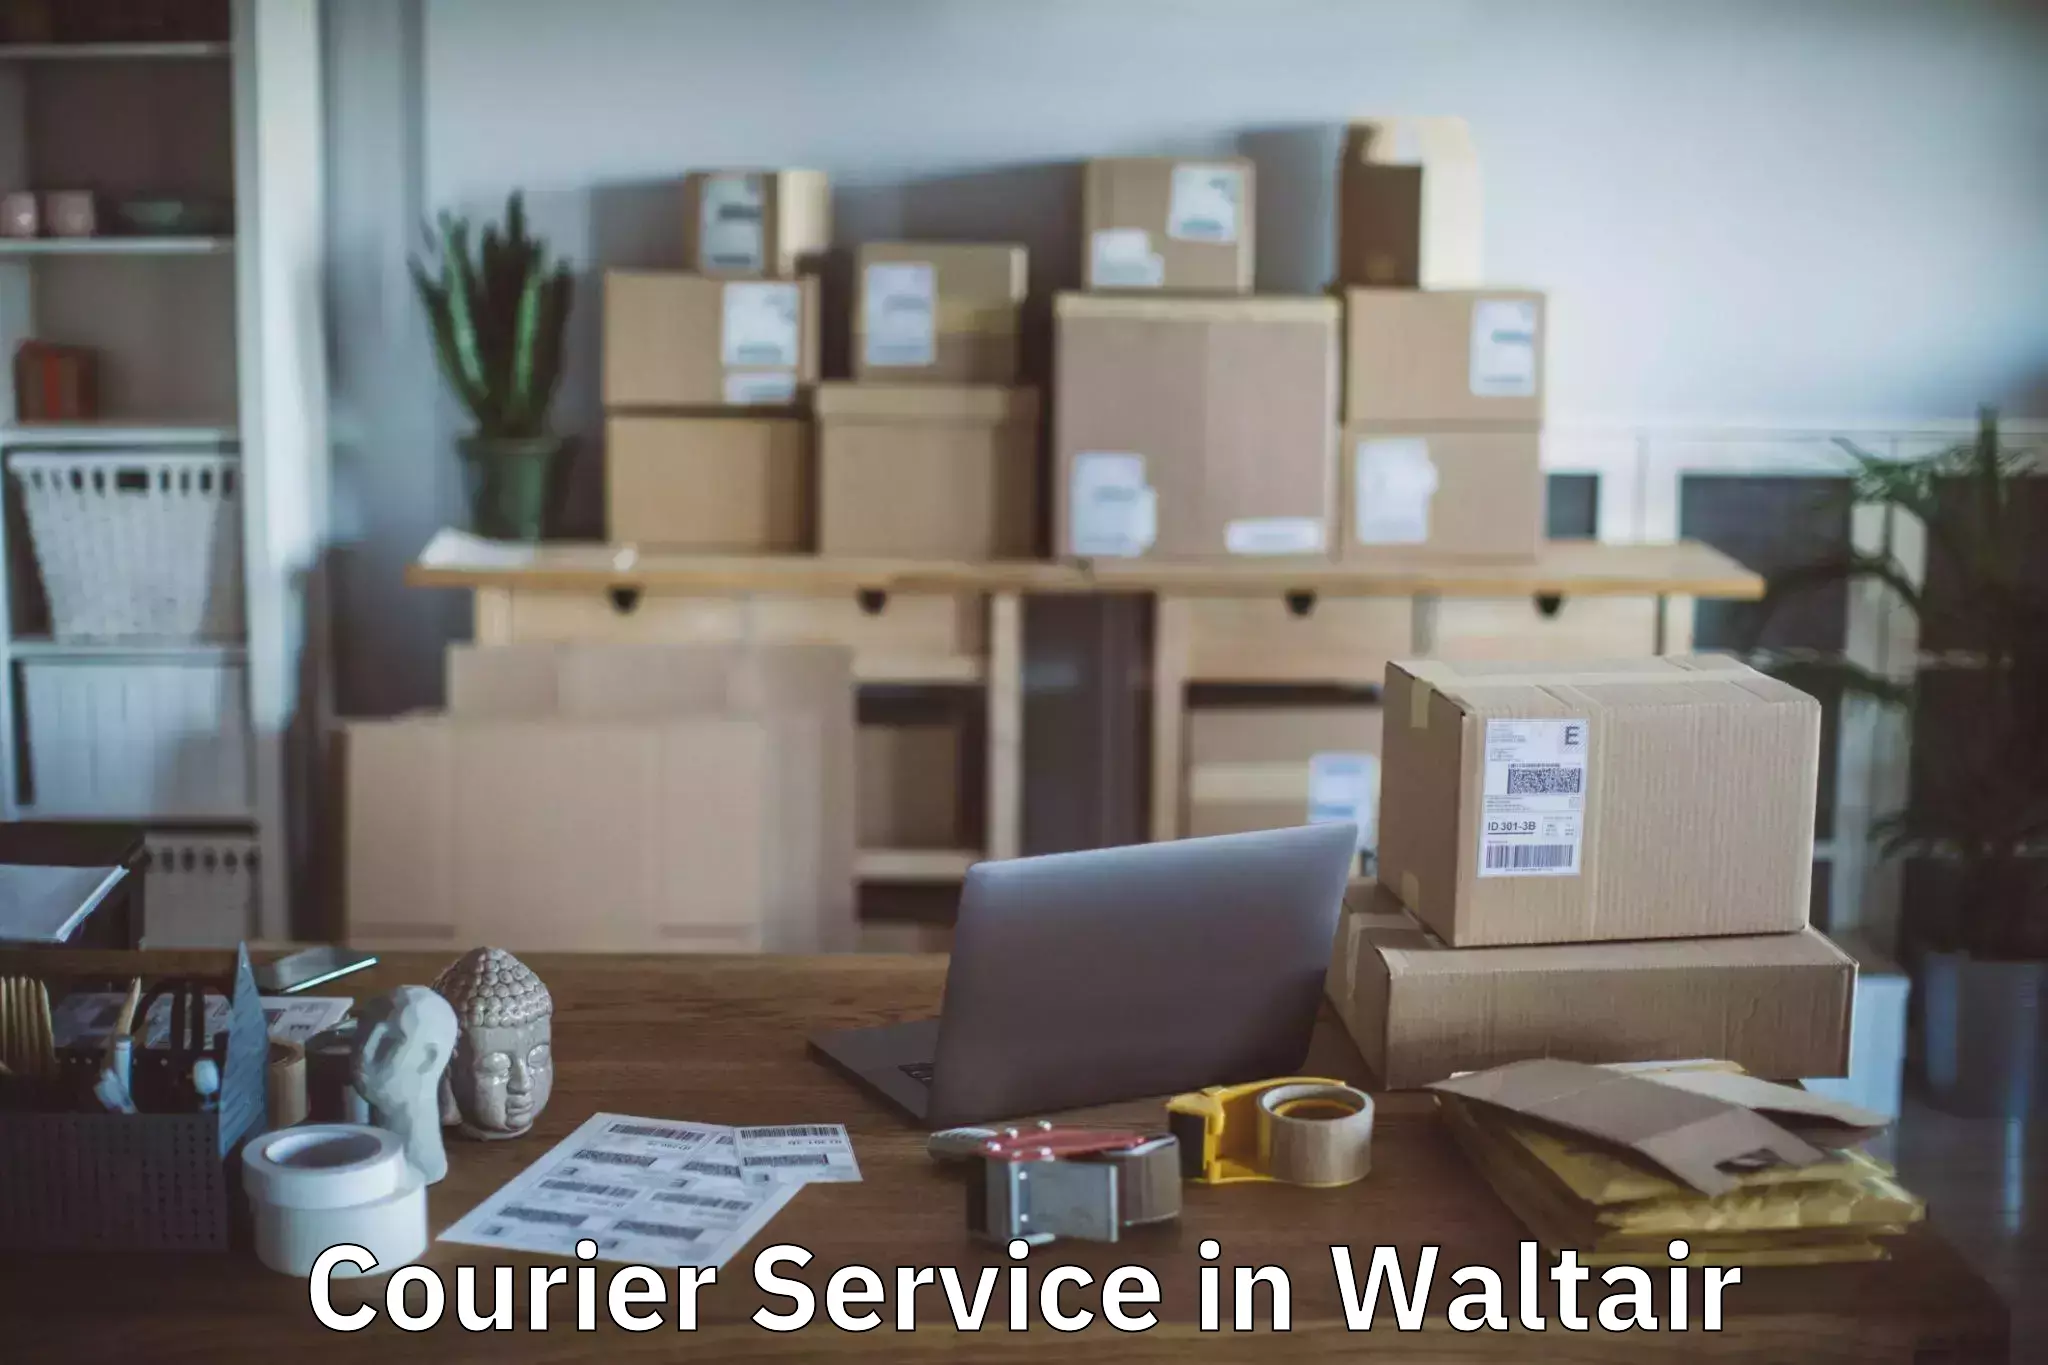 Remote area delivery in Waltair